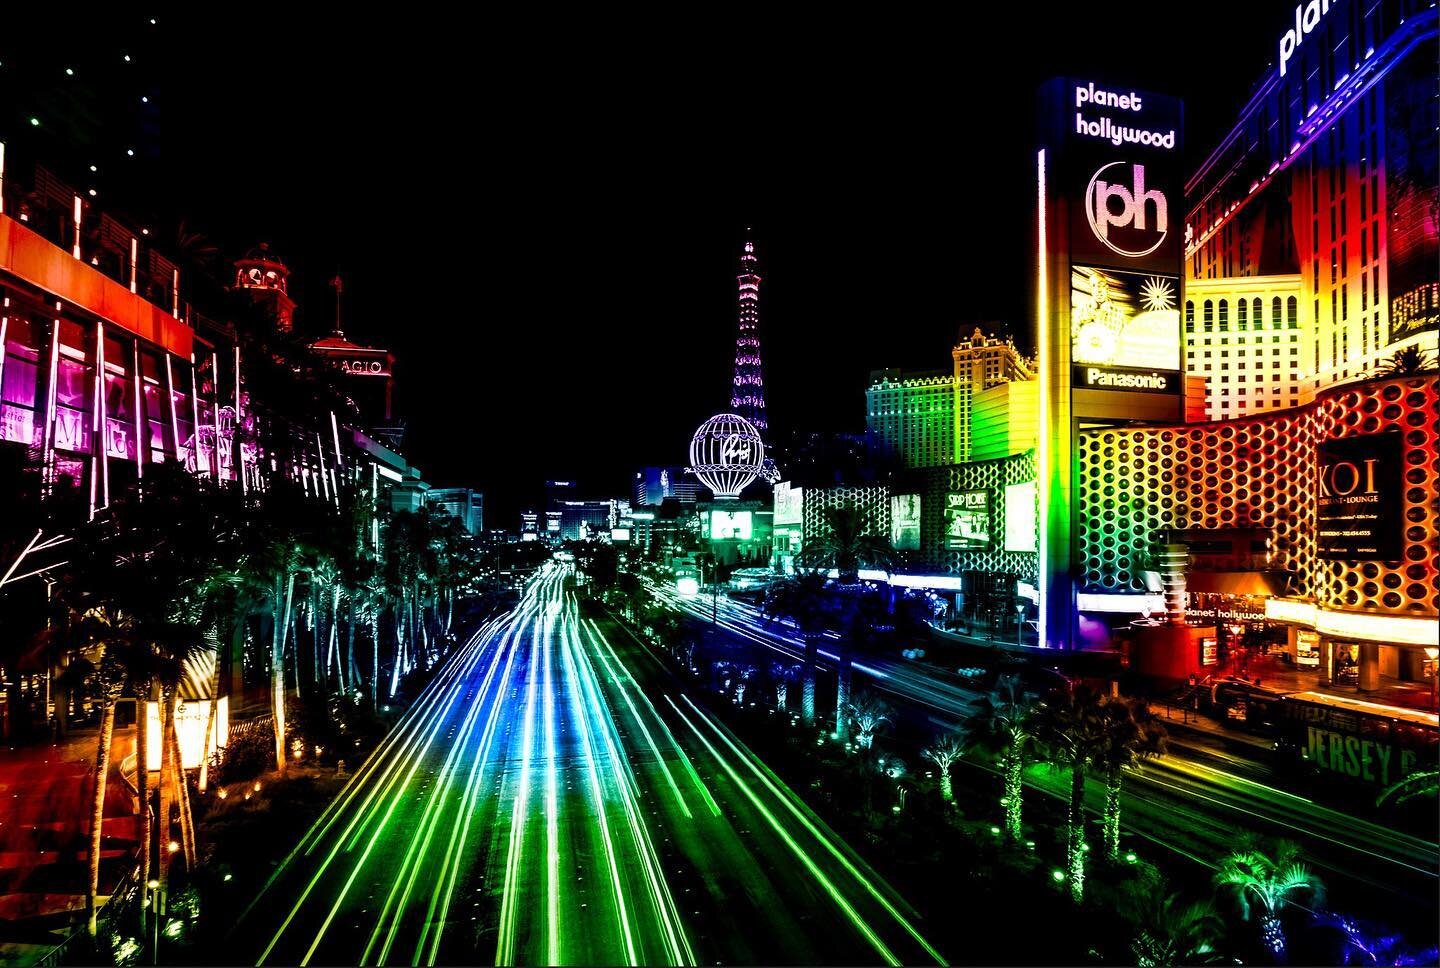 Finally got out to shoot the strip. Tried to do some long exposure. Then did some creative color toning. Pretty happy with the outcome. Gonna get this printed on Metal. #lasvegas @canonusa